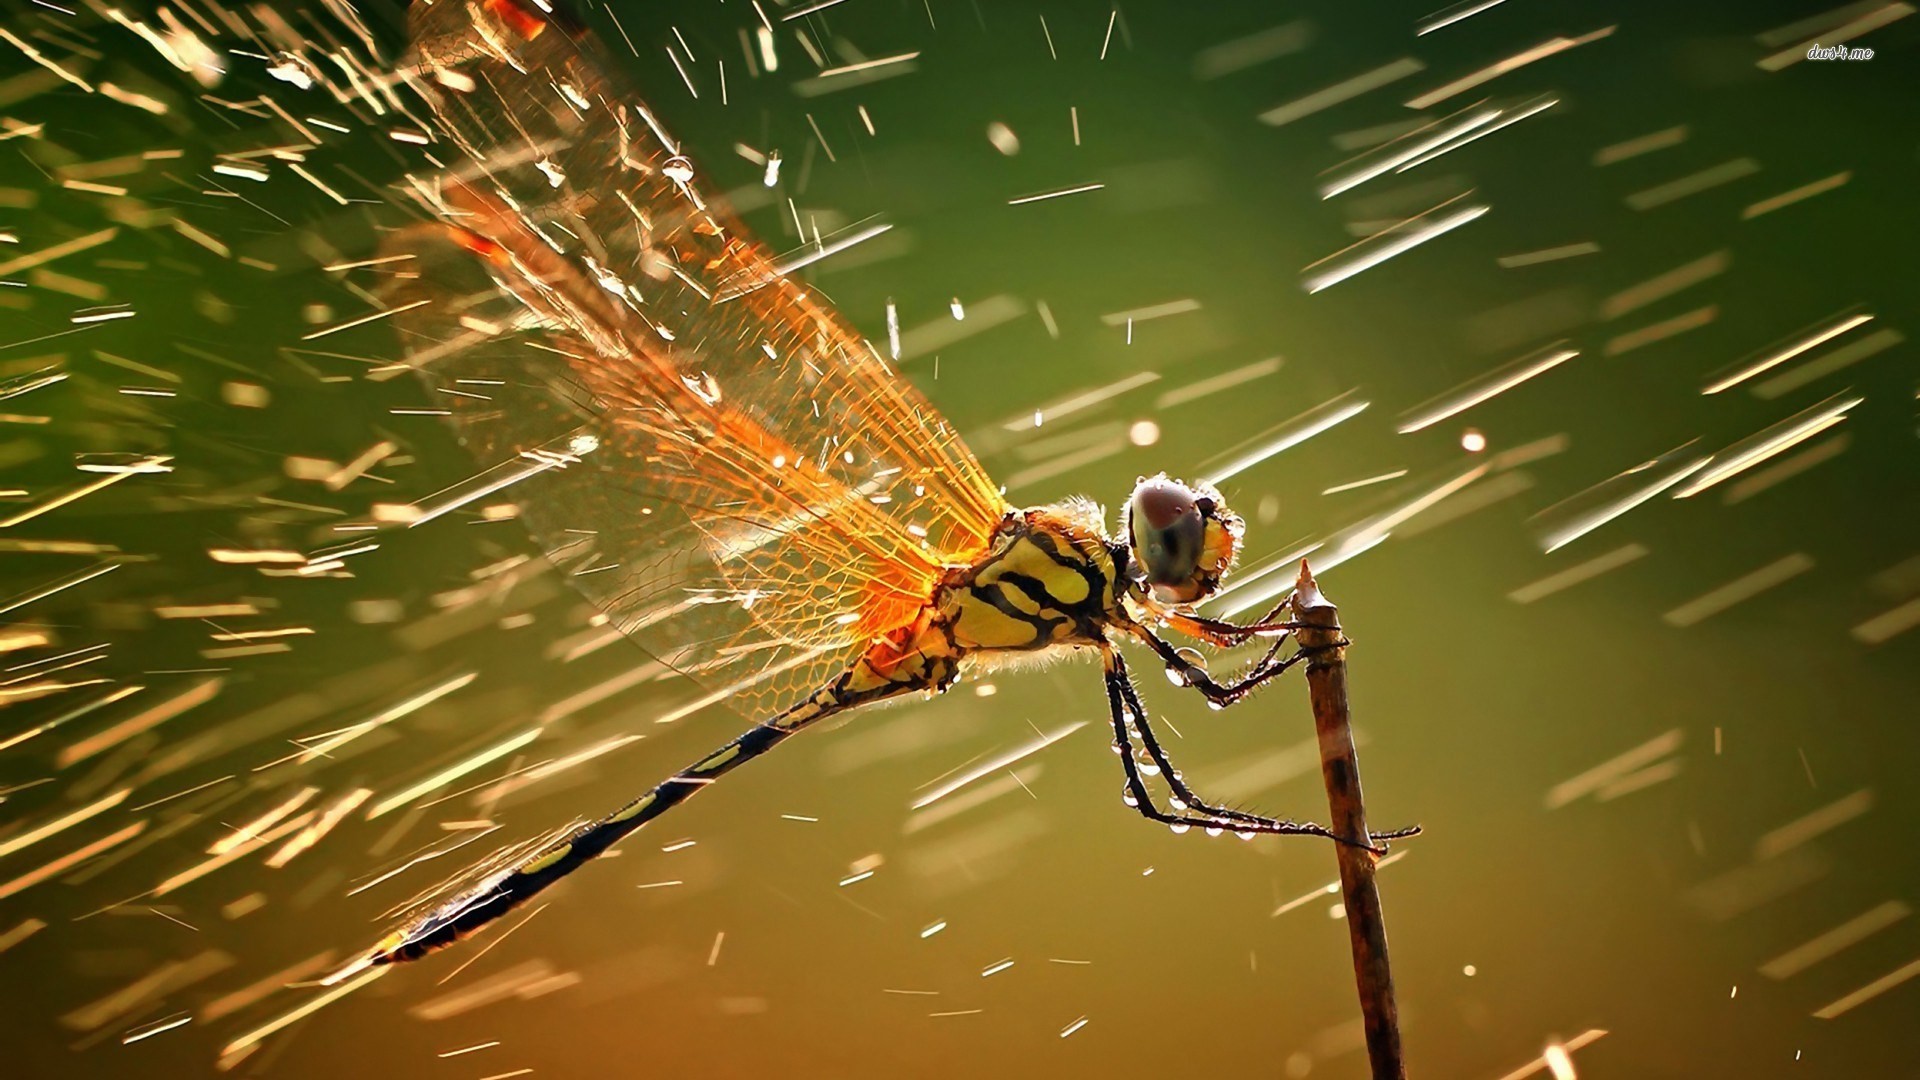 1920x1080  free screensaver wallpapers for dragonfly